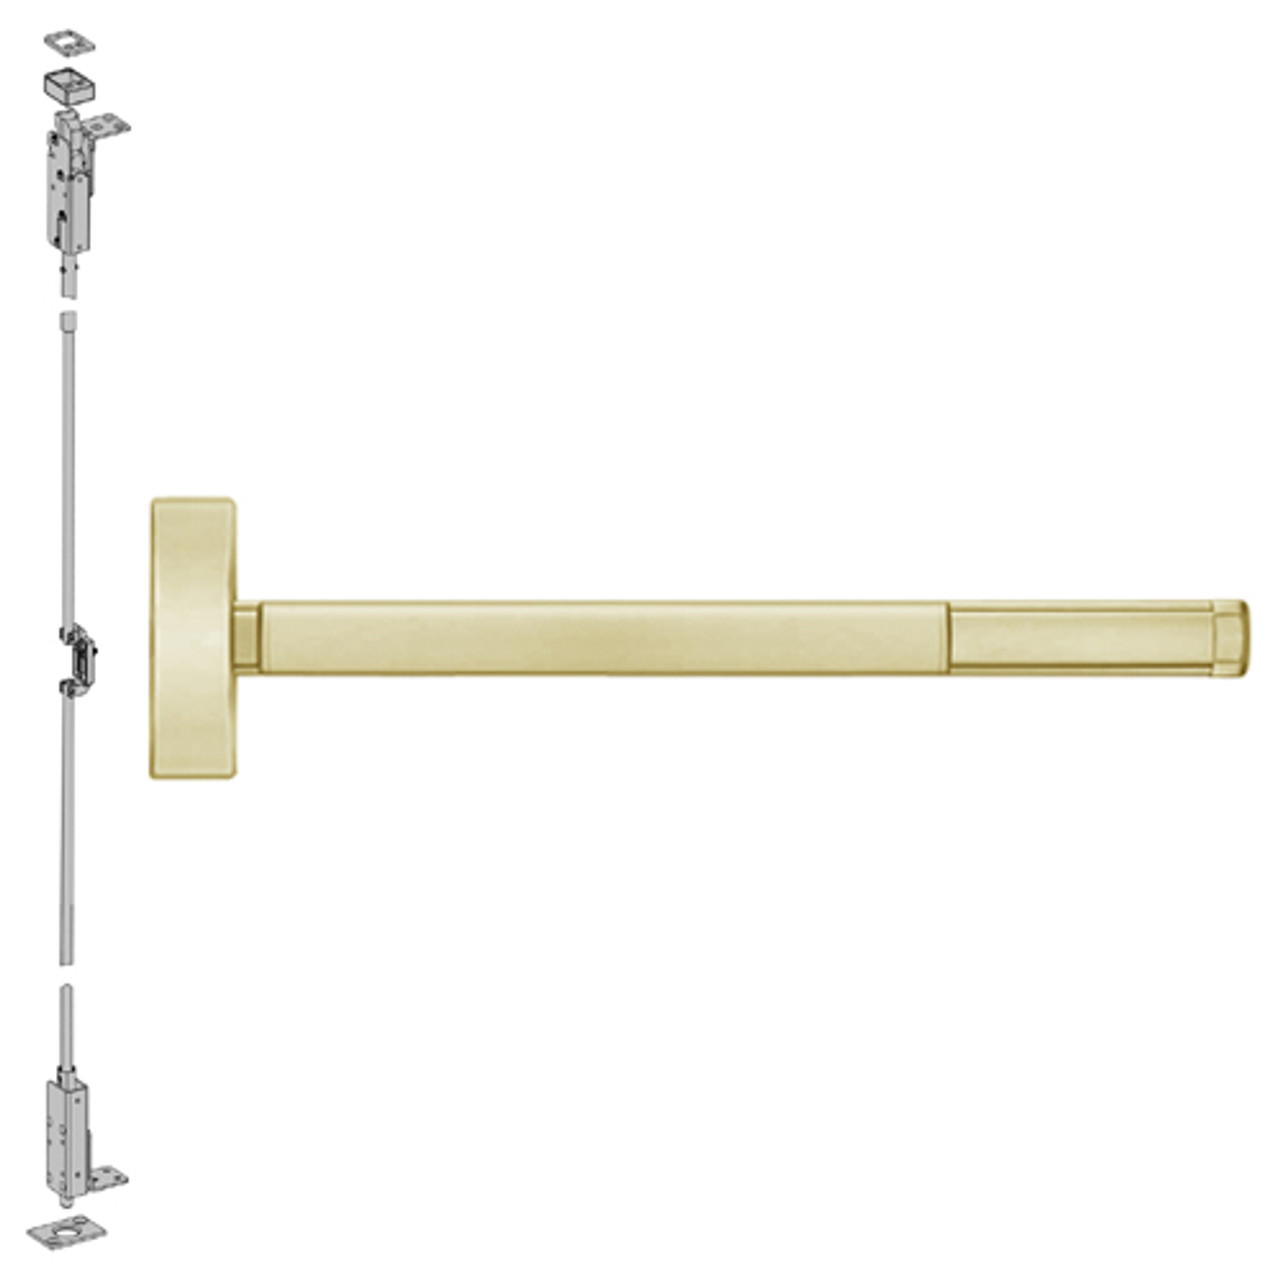 TS2705-606-48 PHI 2700 Series Wood Door Concealed Vertical Exit Device with Touchbar Monitoring Switch Prepped for Key Controls Thumb Piece in Satin Brass Finish